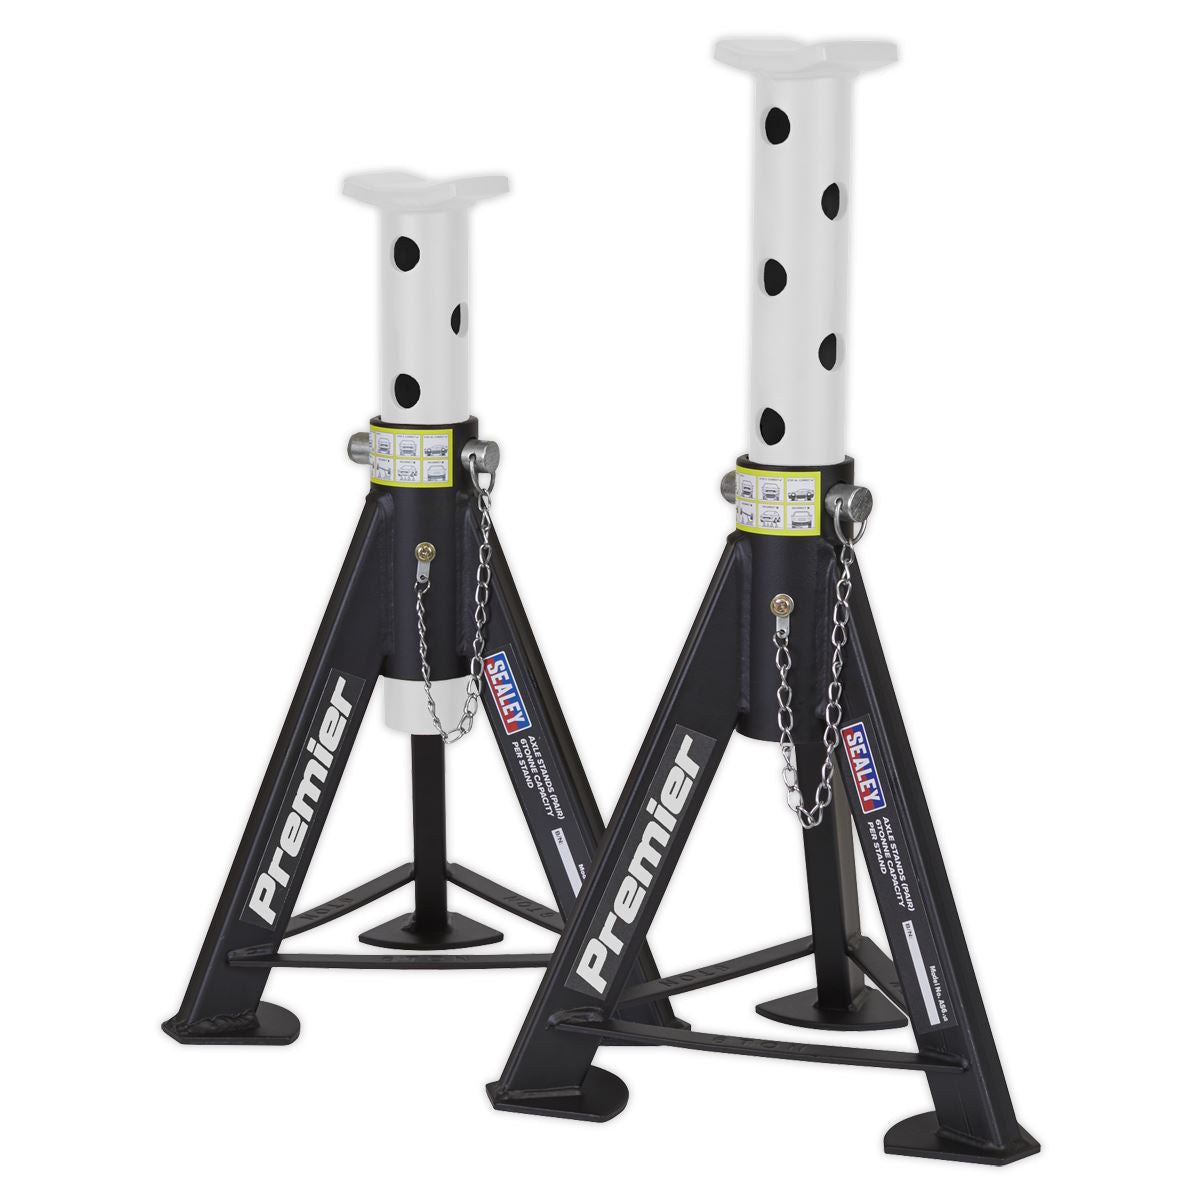 Sealey Premier Premier Axle Stands (Pair) 6 Tonne Capacity per Stand - White